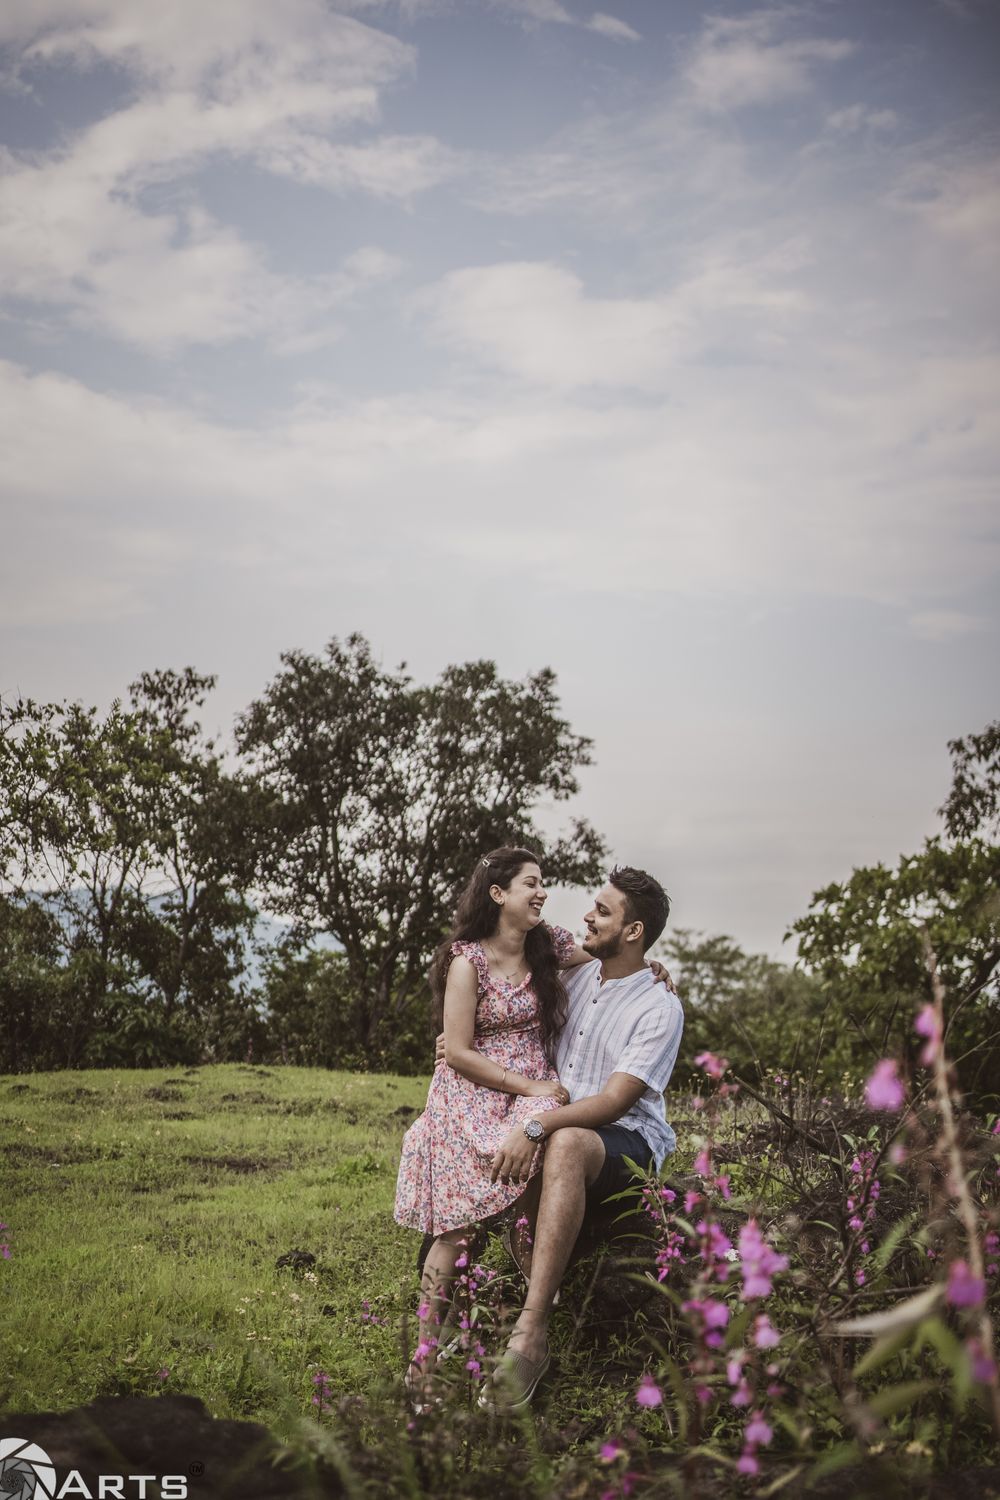 Photo From Apurv & Jasbeer - By The Aperture Arts